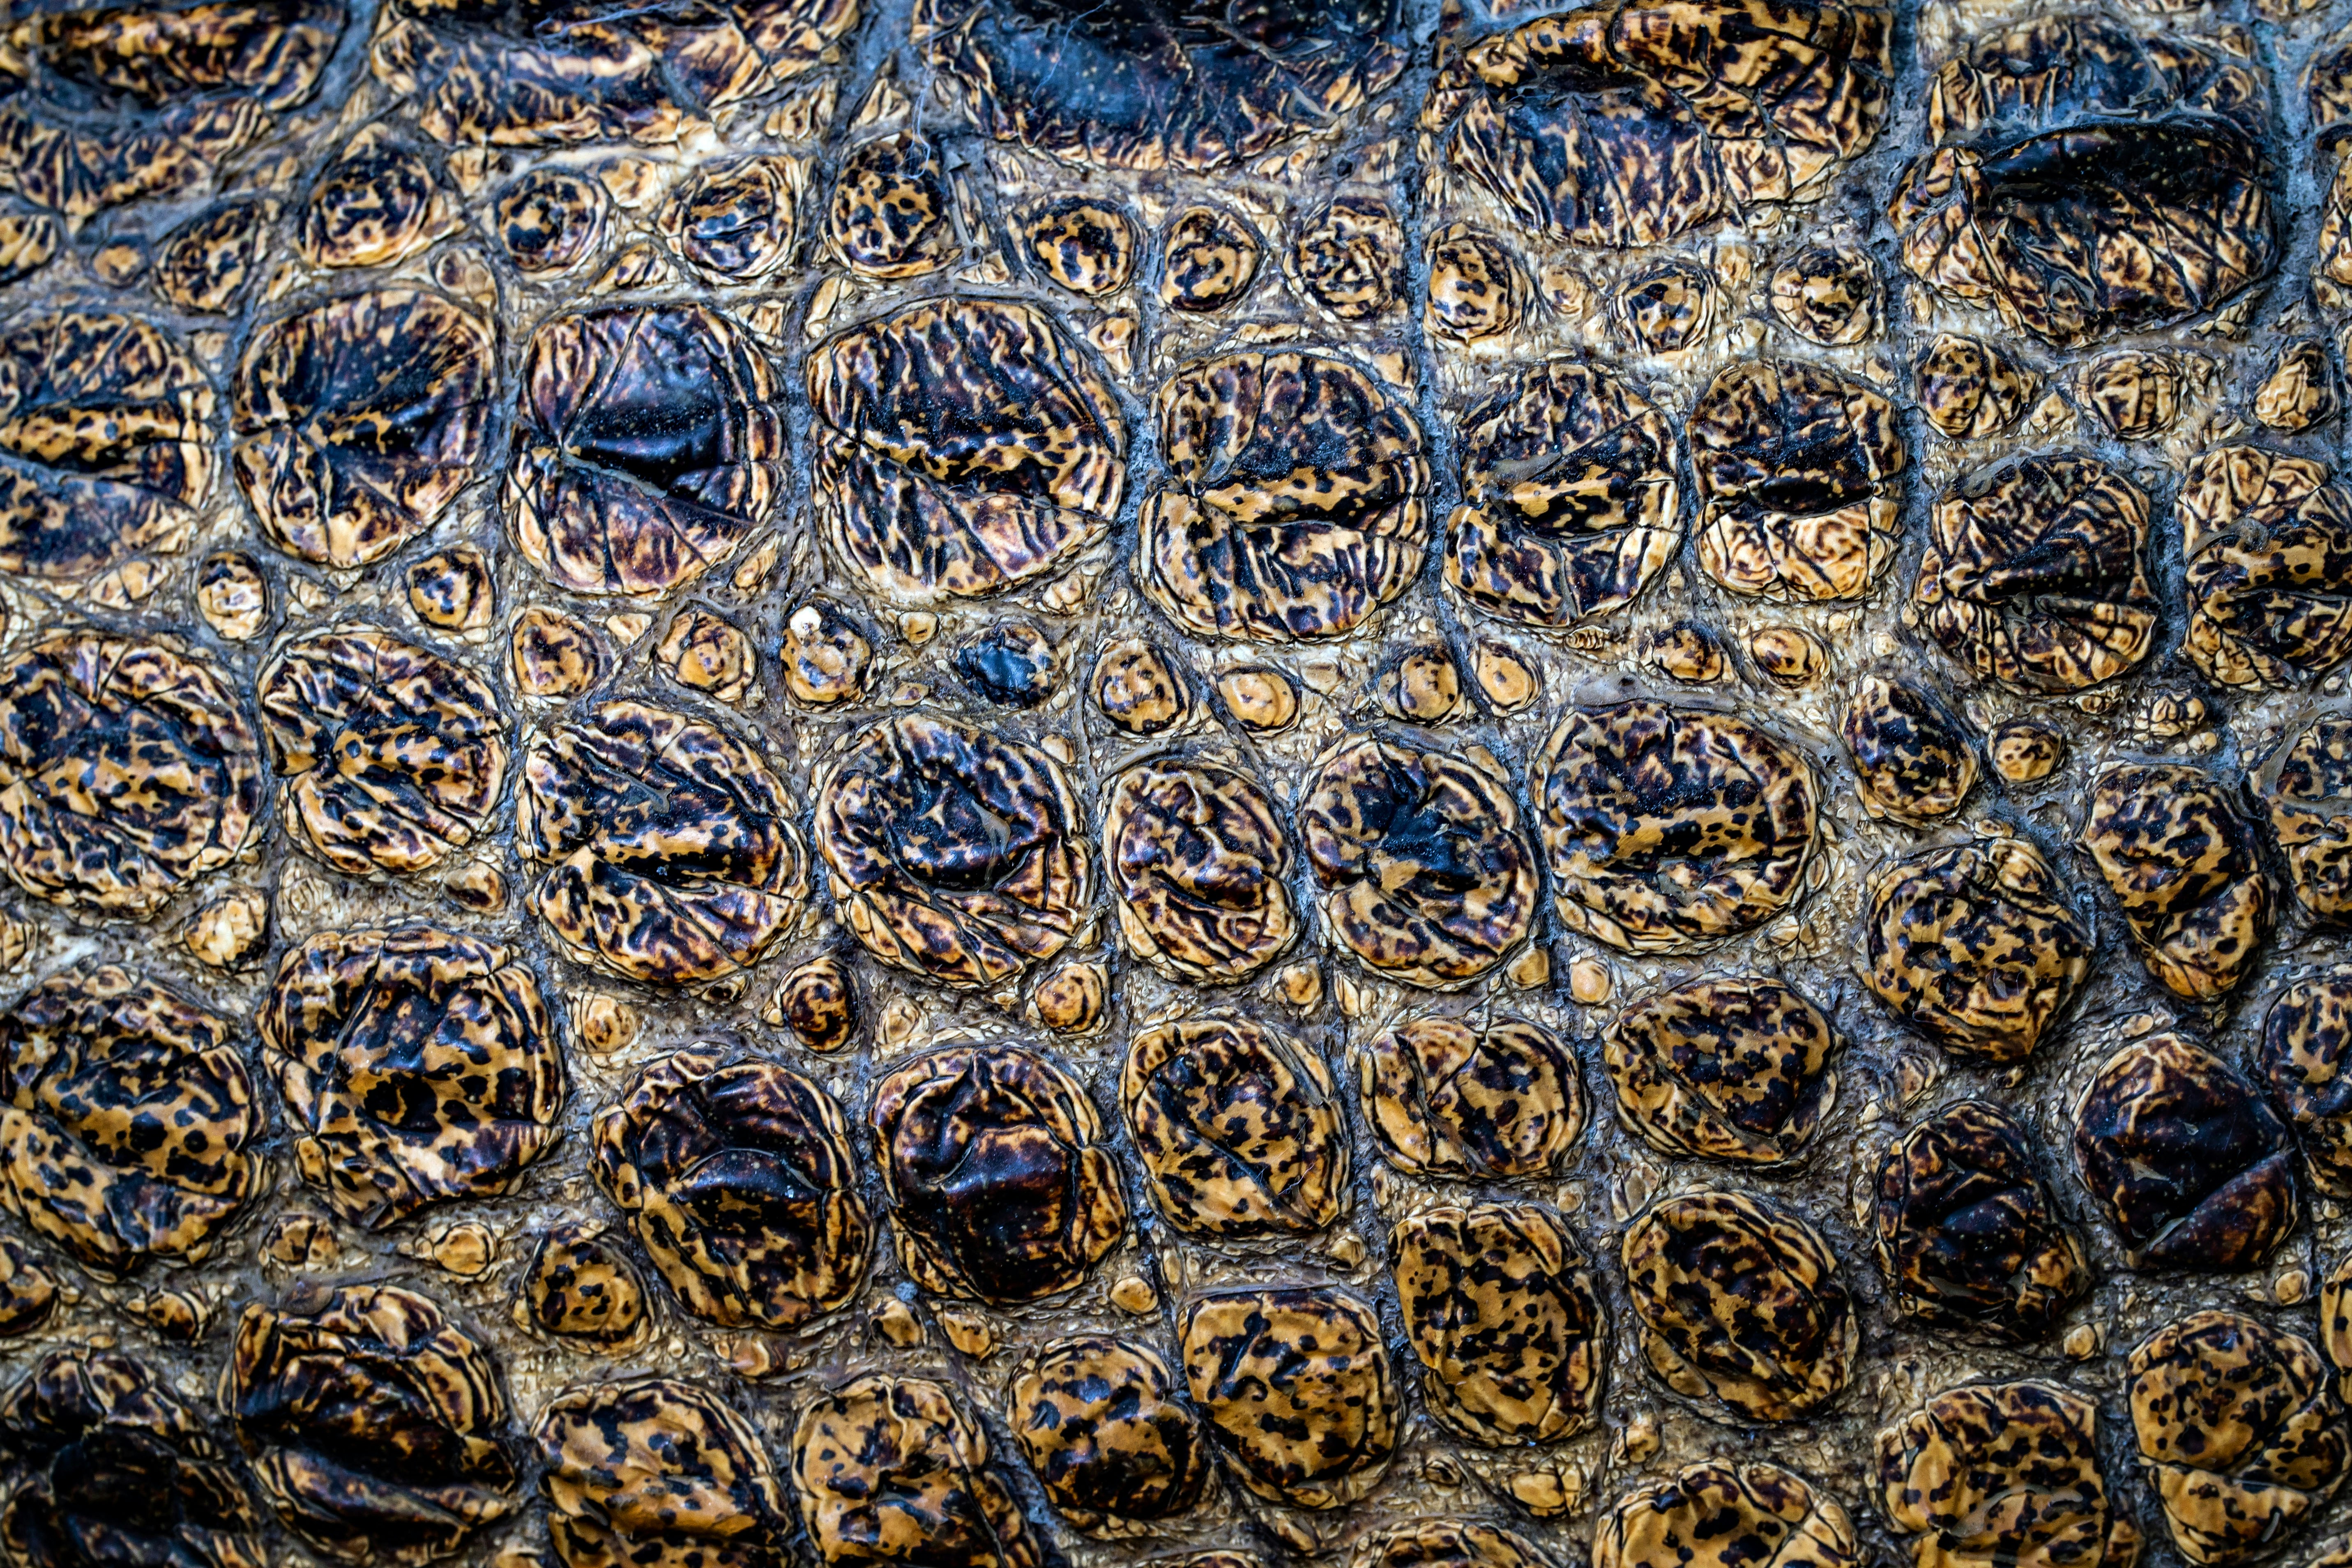 The side of a crocodile showing the pattern of amoeba shapes which makes excellent camouflage in the wild. I design camouflage patterns, and my range of amoeba camouflage designs is inspired by this pattern. If you are interested in camouflage, visit my web site camouflagepatterns.wordpress.com. I hope that some day my camouflage will be used on photographer's vests, for bird, safari and general nature photographers.